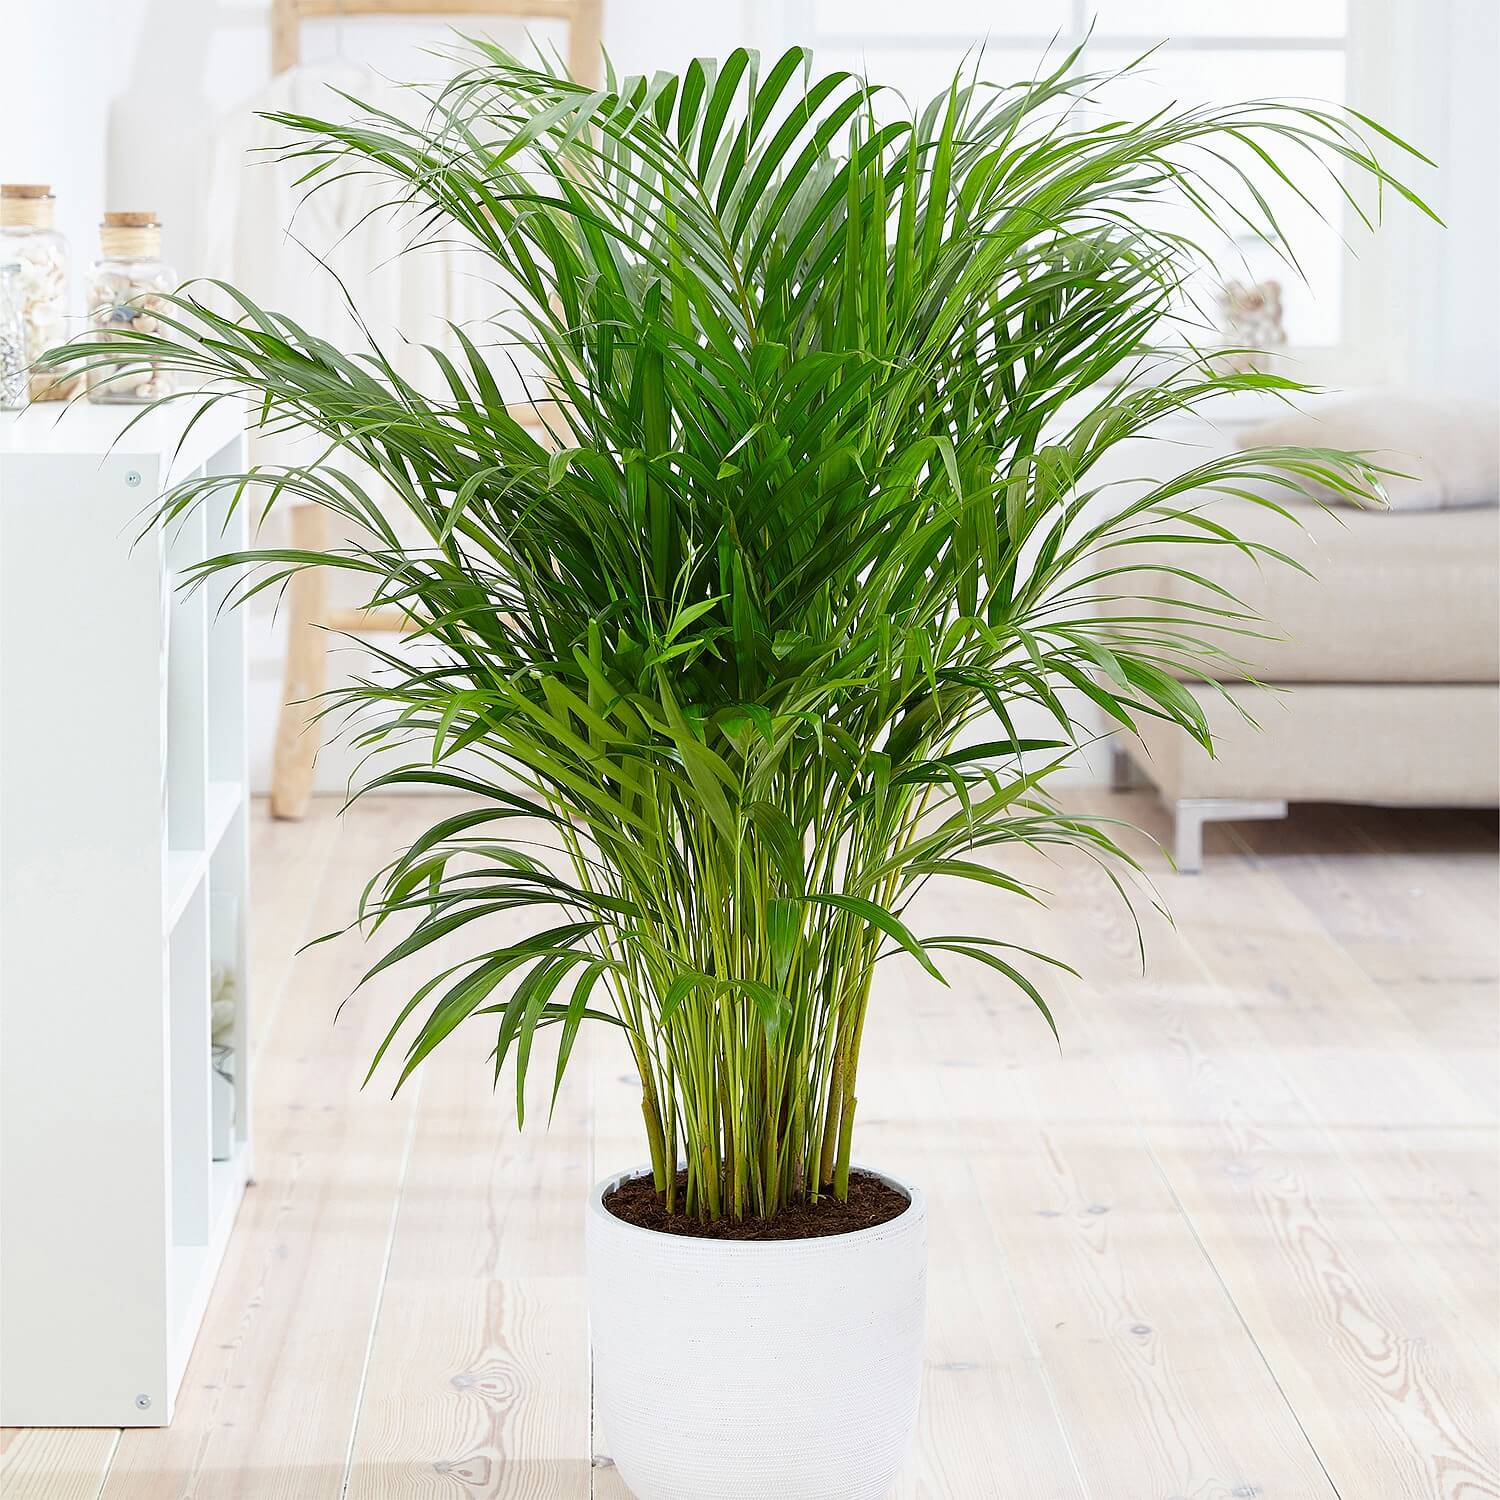 Areca Palm - Dypsis lutescens (approx 50-60cm)